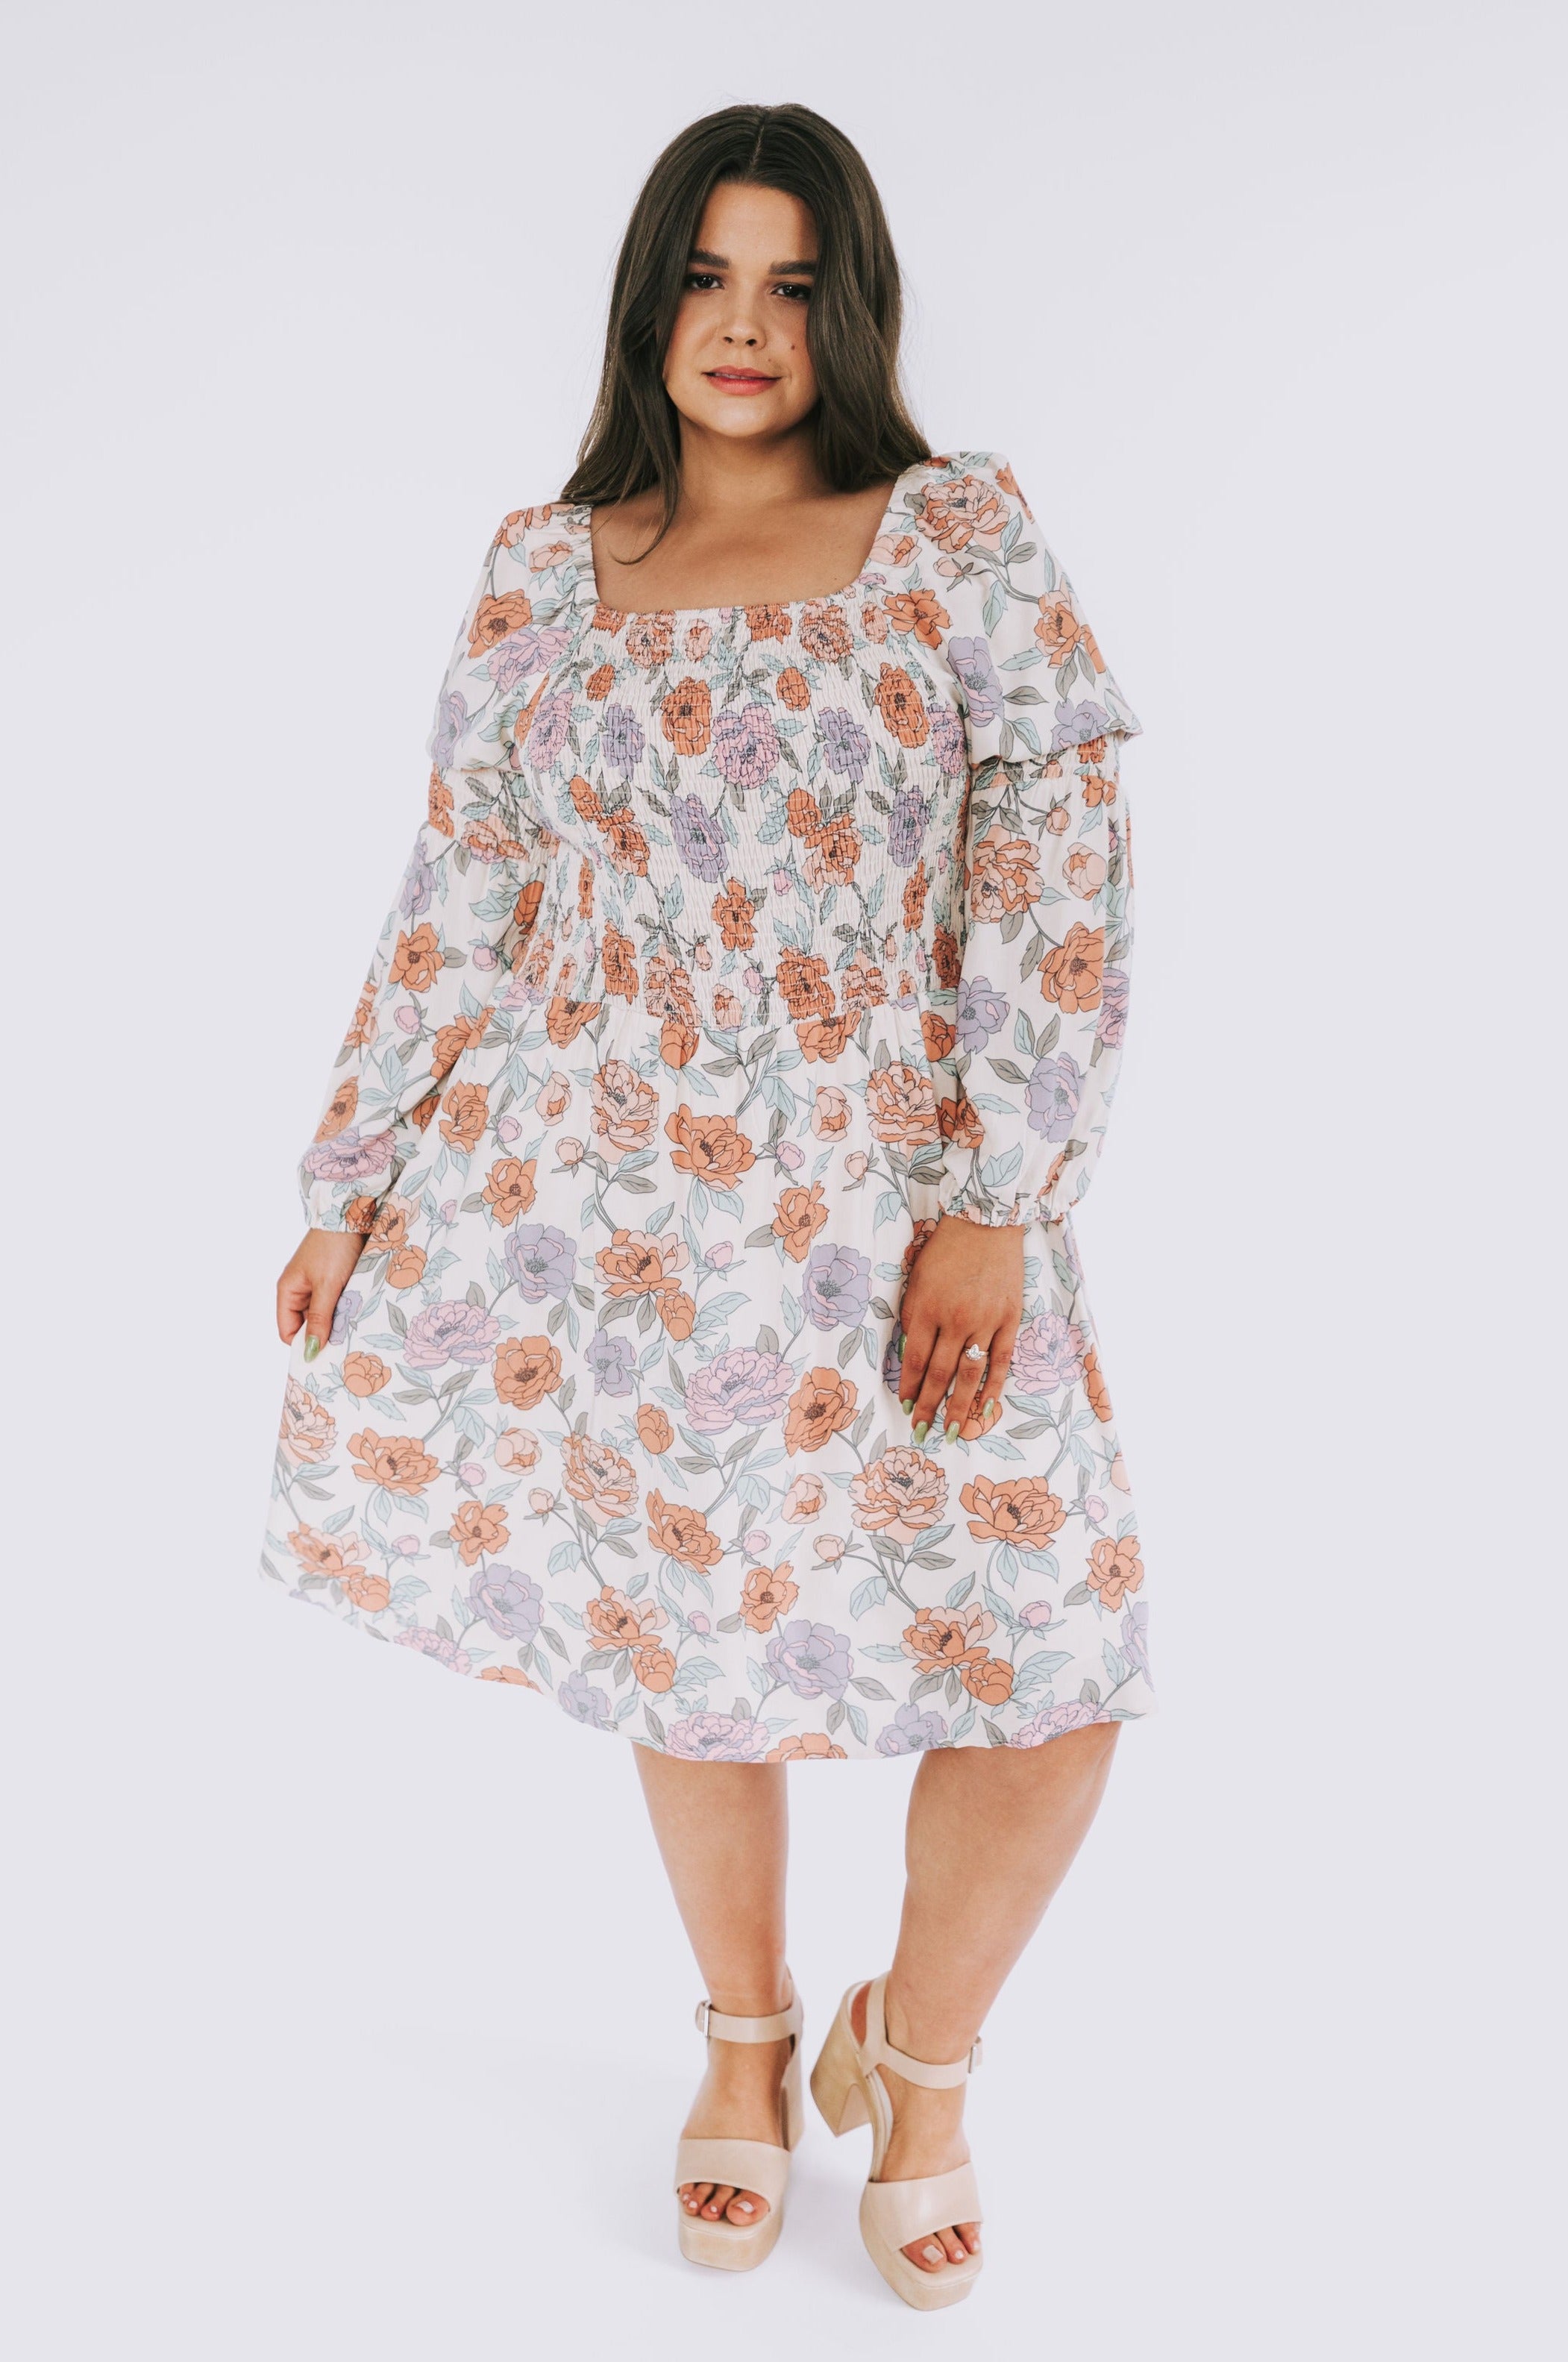 PLUS SIZE - Realize This Dress